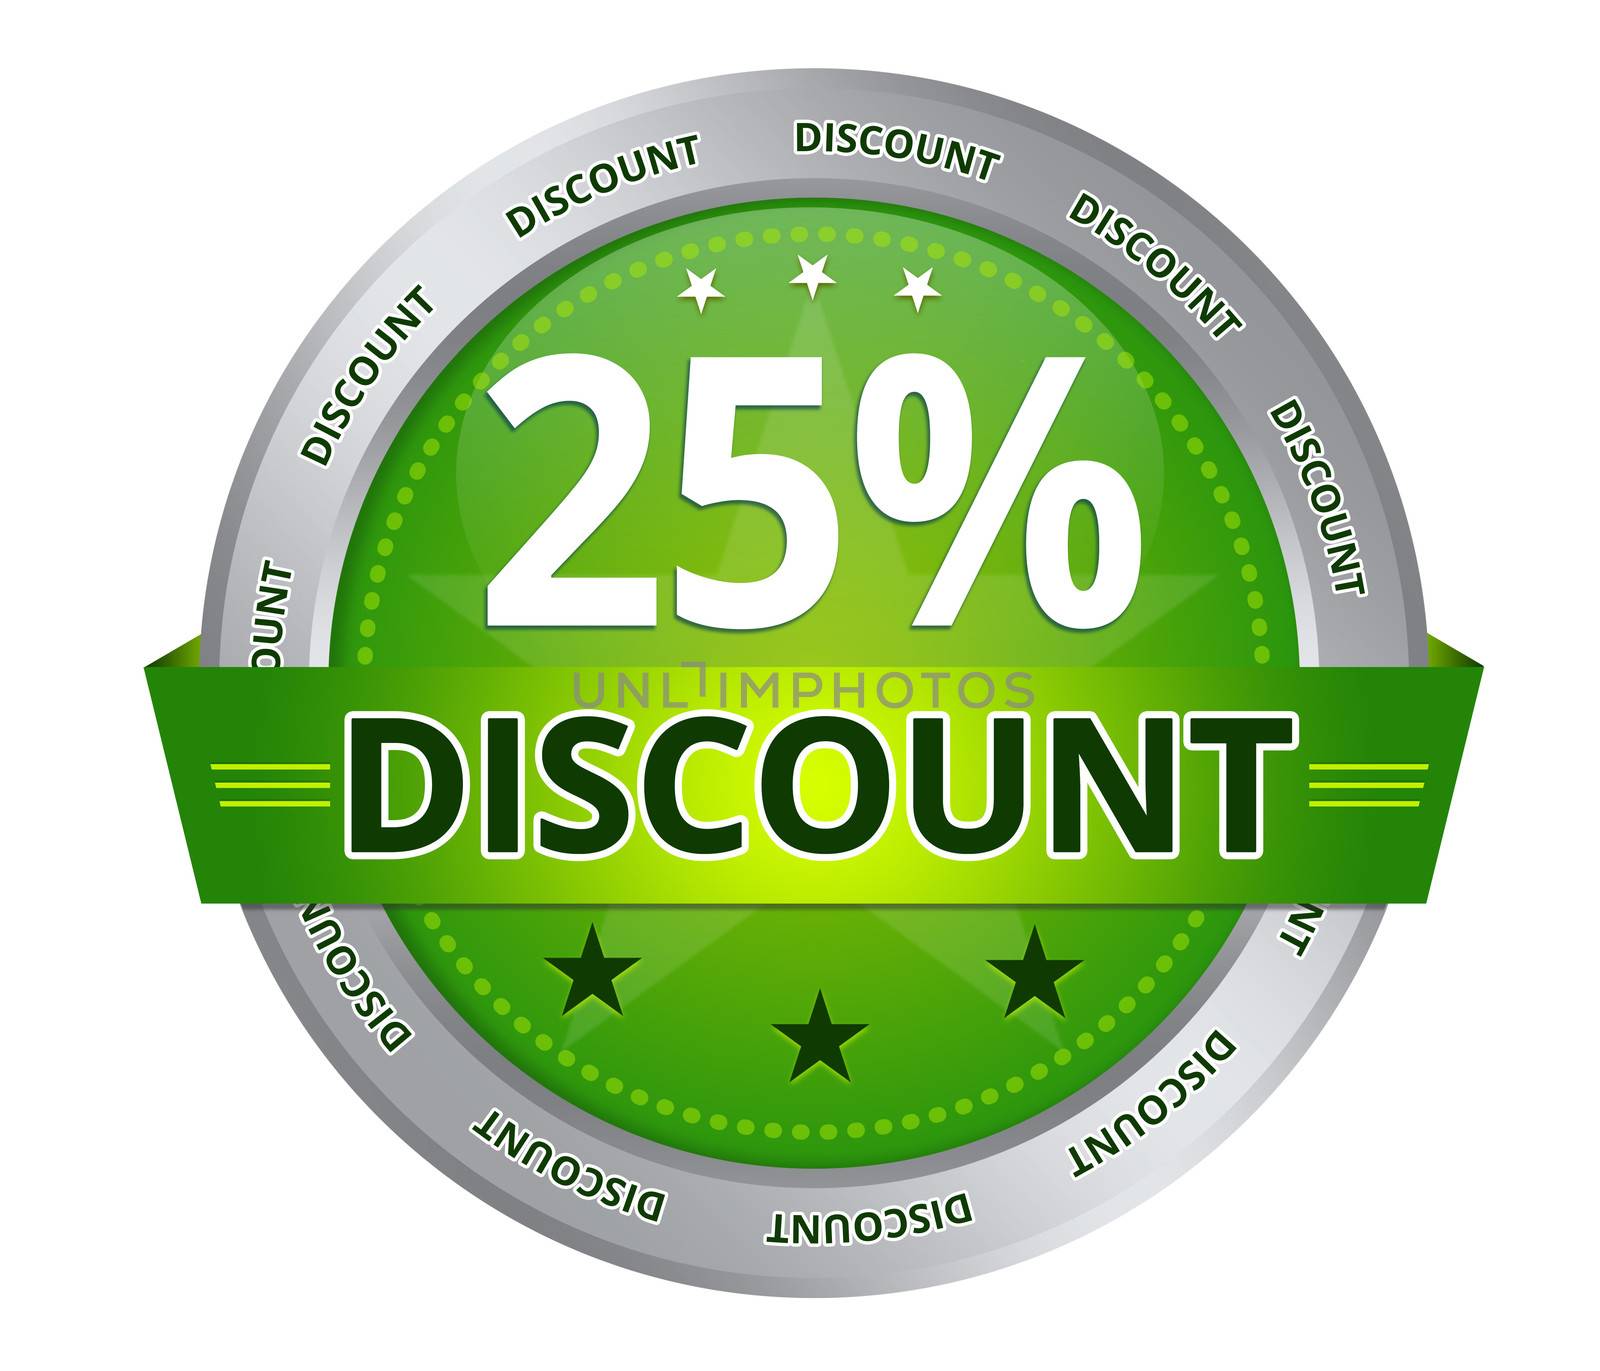 Green 25 percent Discount icon on white background